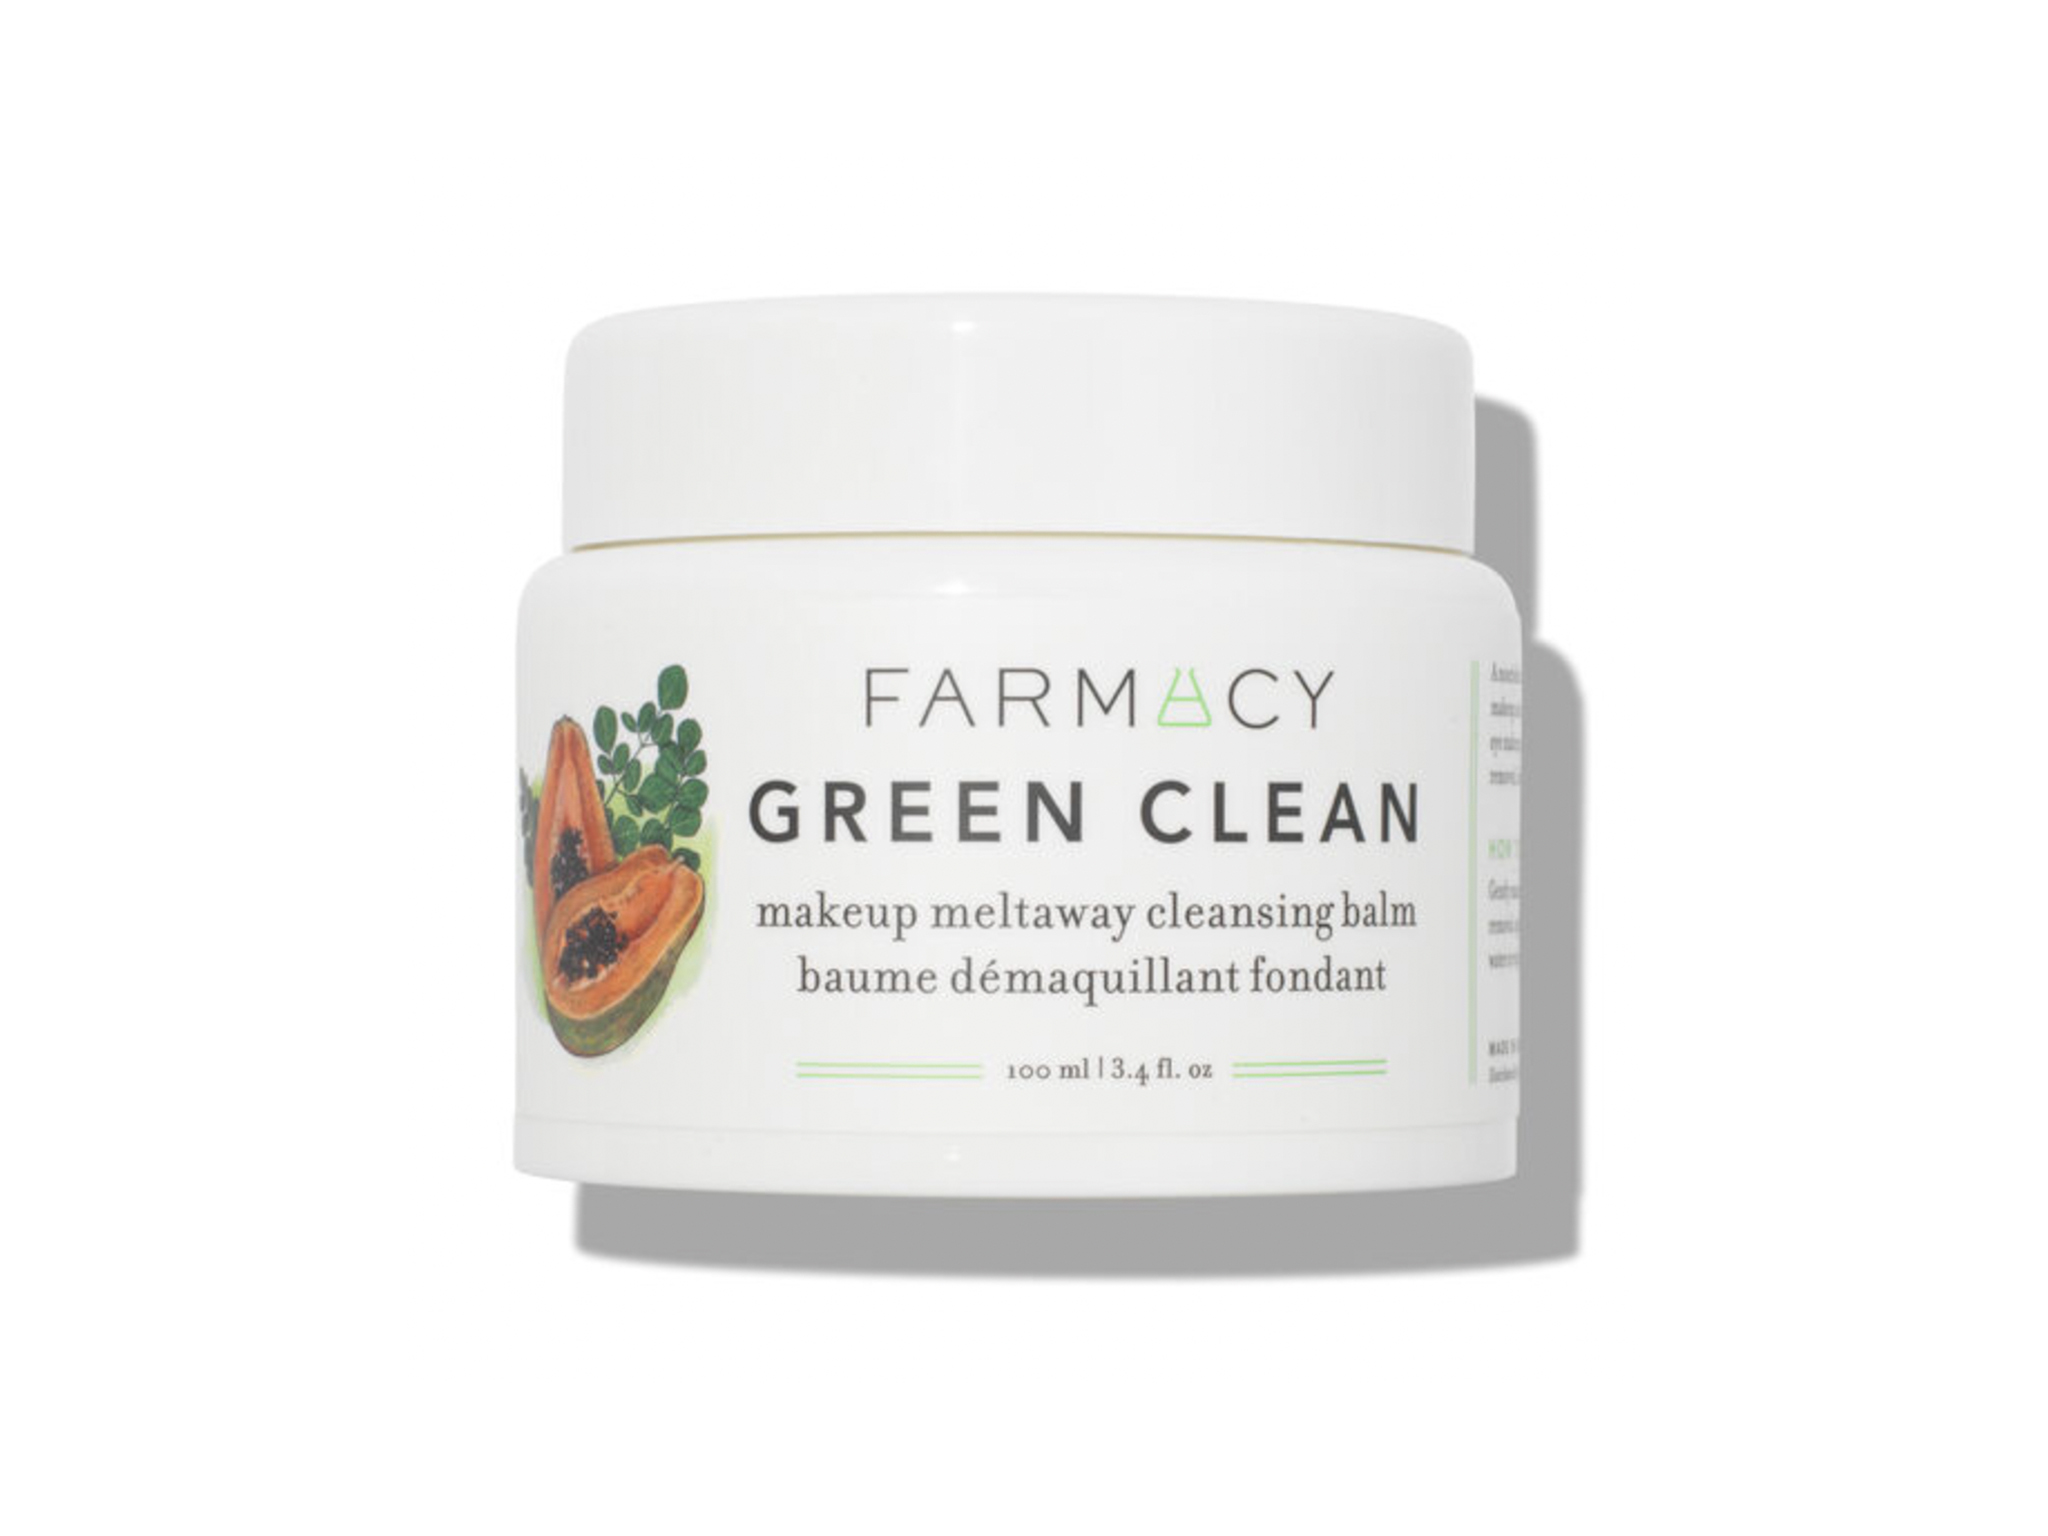 Farmacy Beauty green clean makeup removing cleansing balm